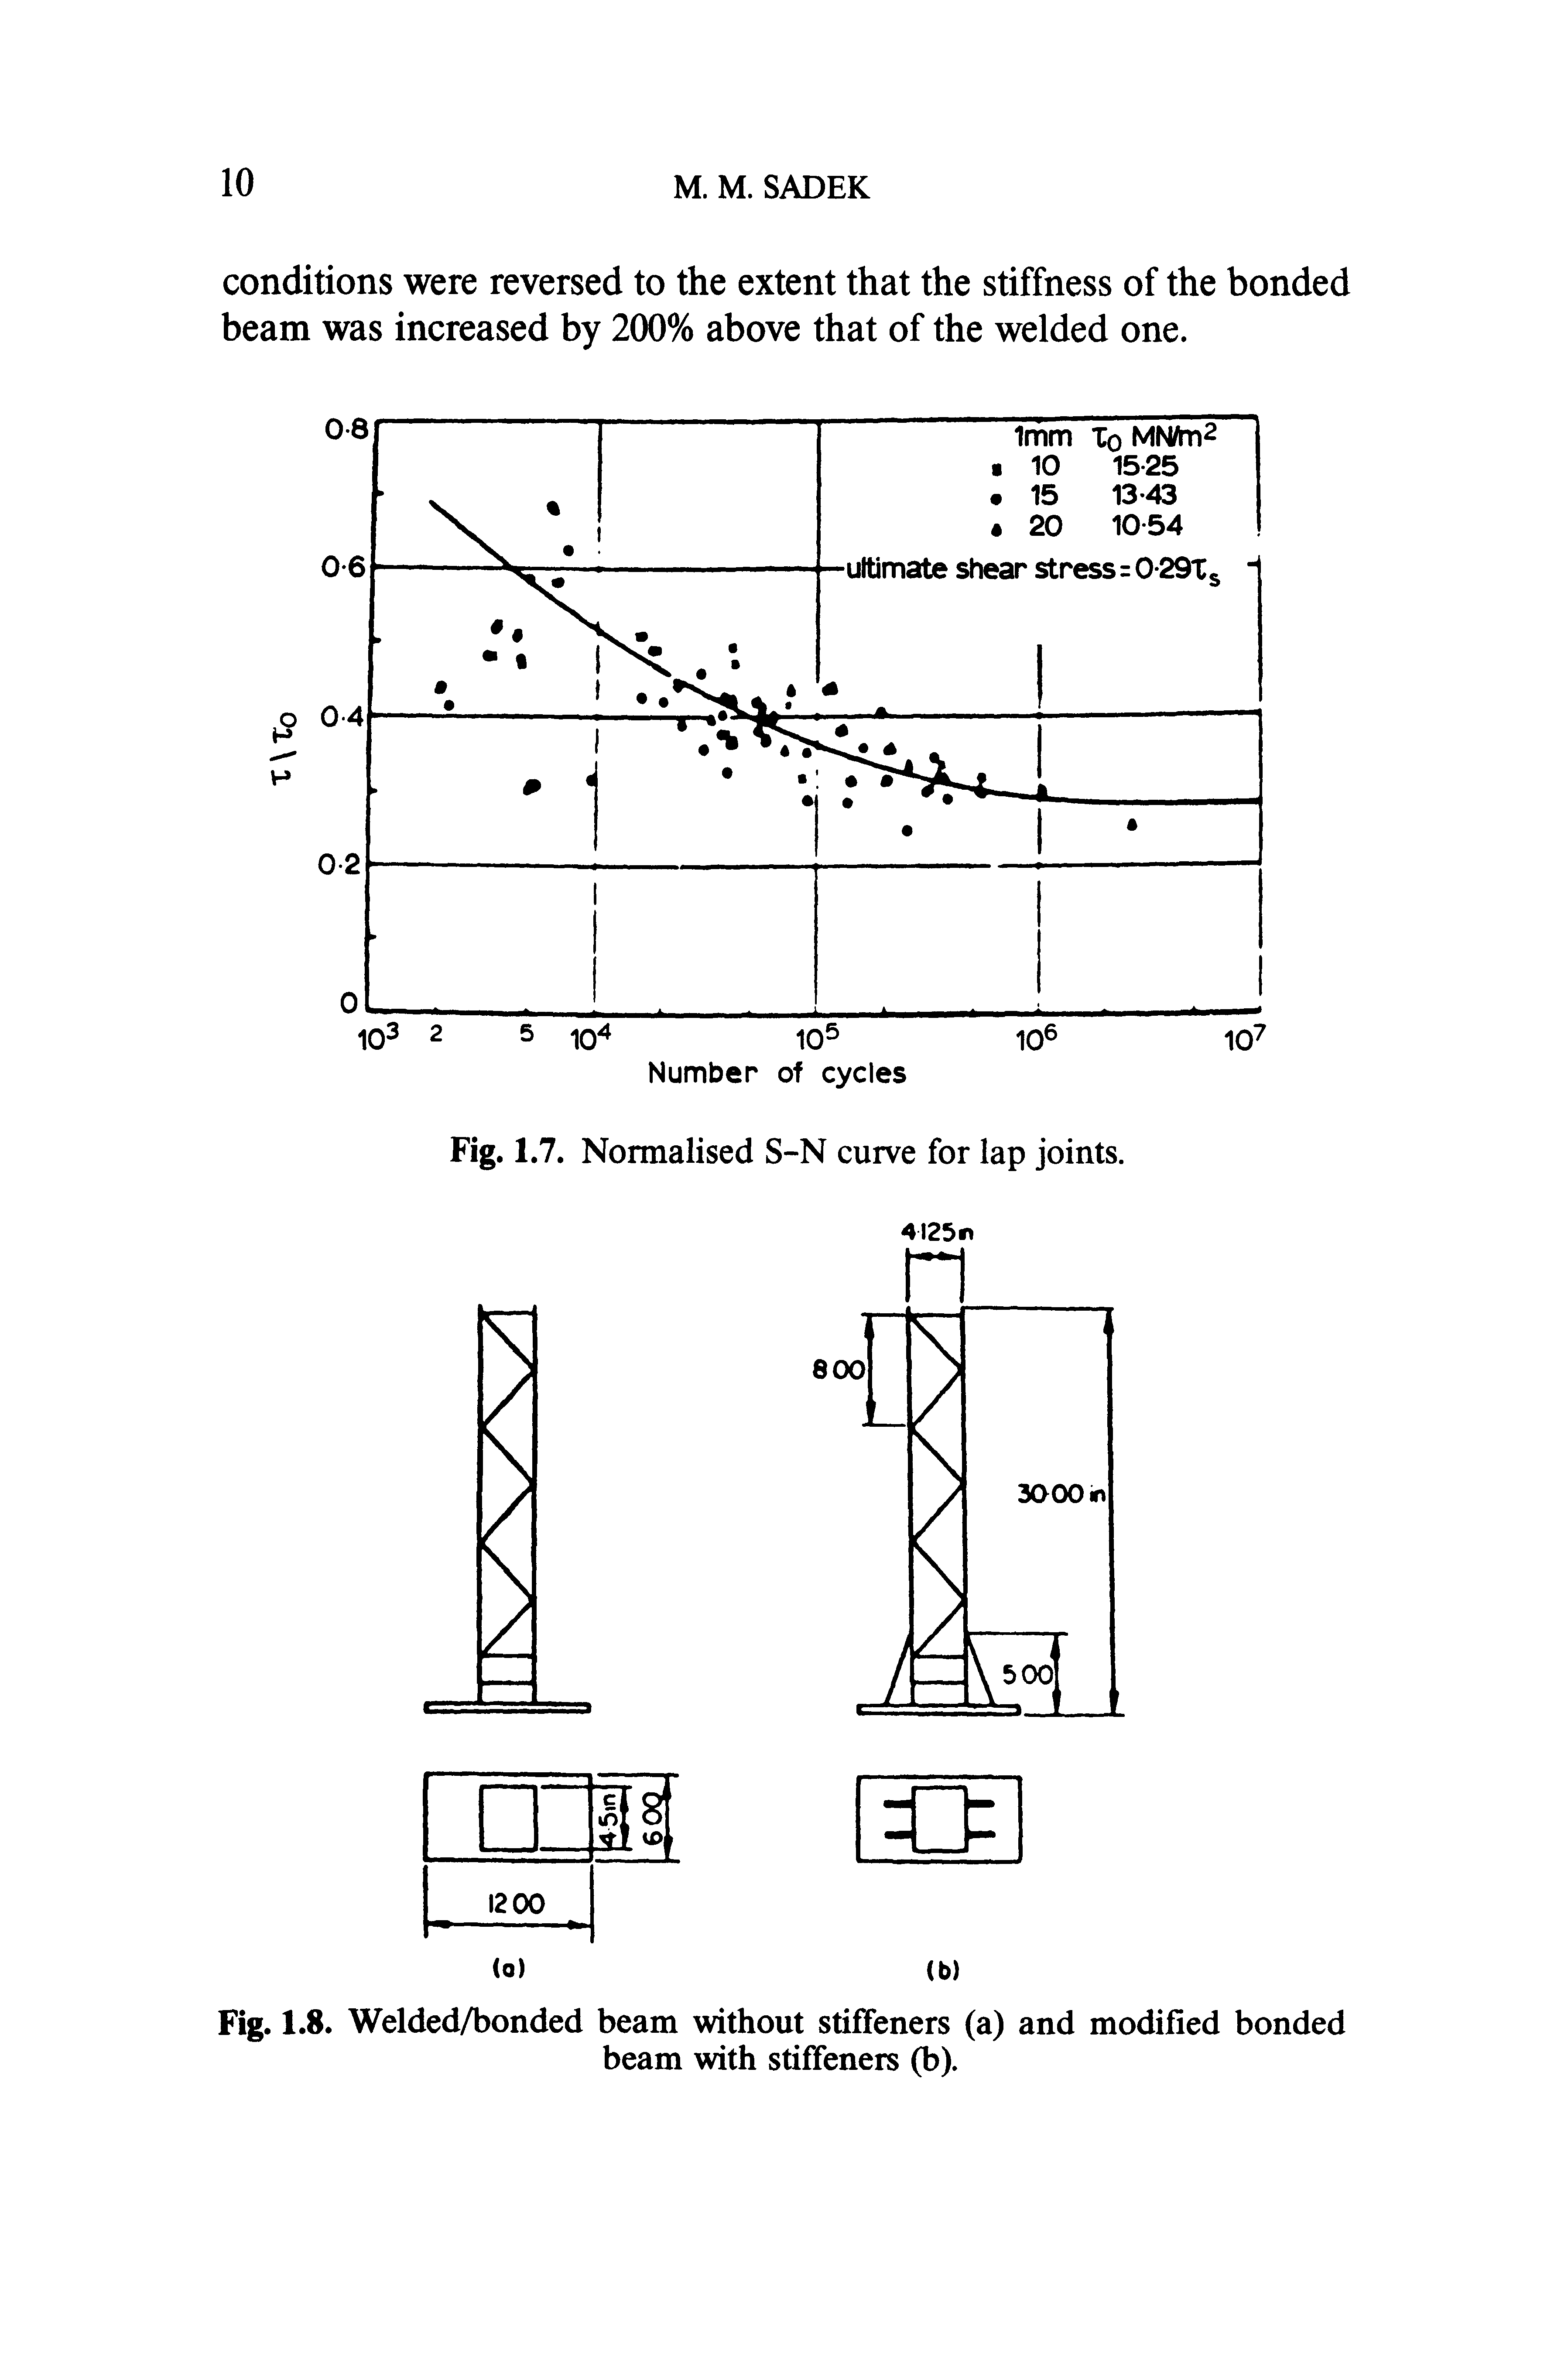 Fig. 1.8. Welded/bonded beam without stiffeners (a) and modified bonded beam with stiffeners (b).